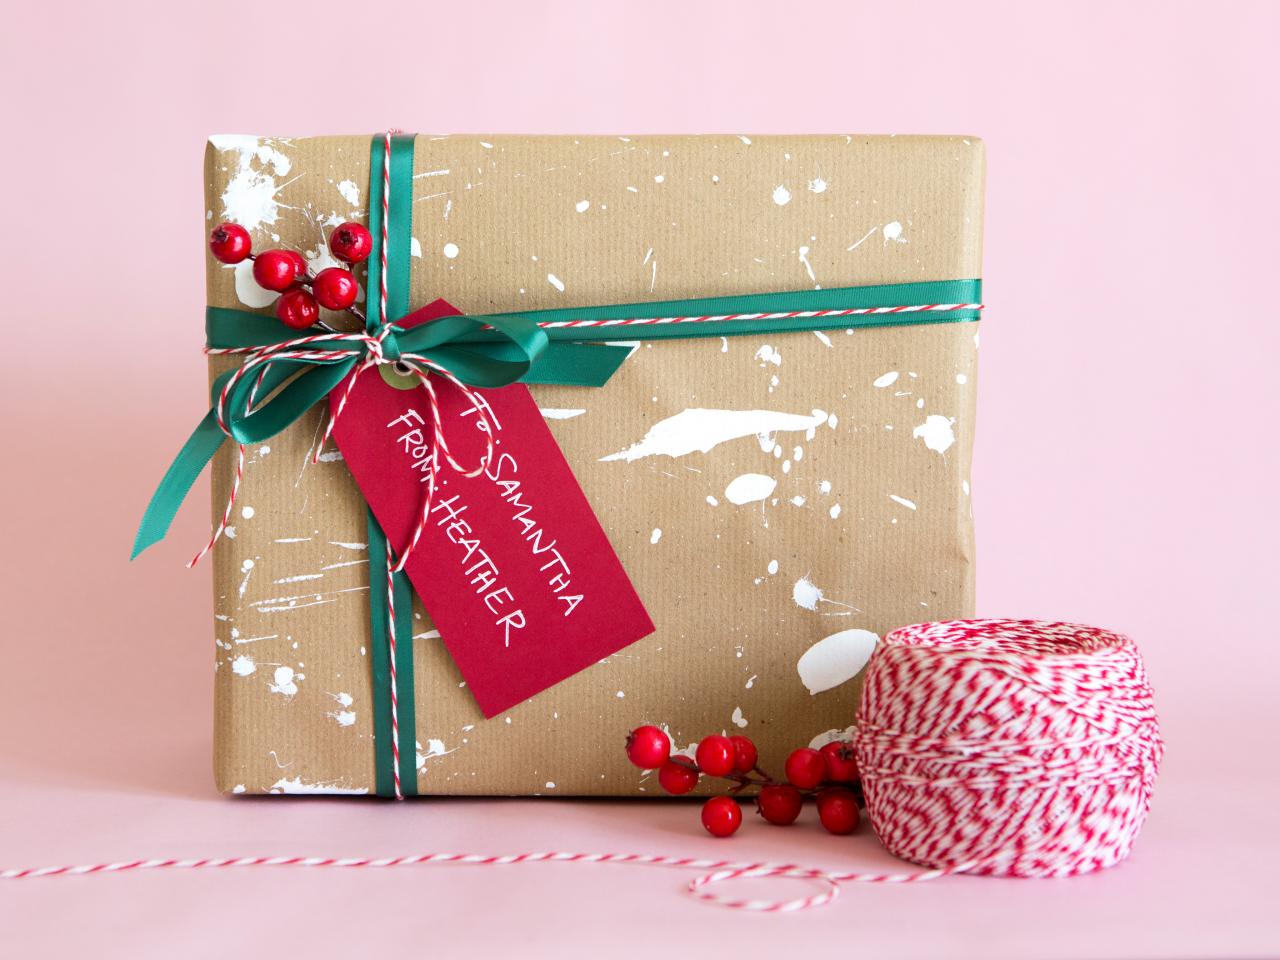 How to Wrap Gifts - Presents for the Holidays